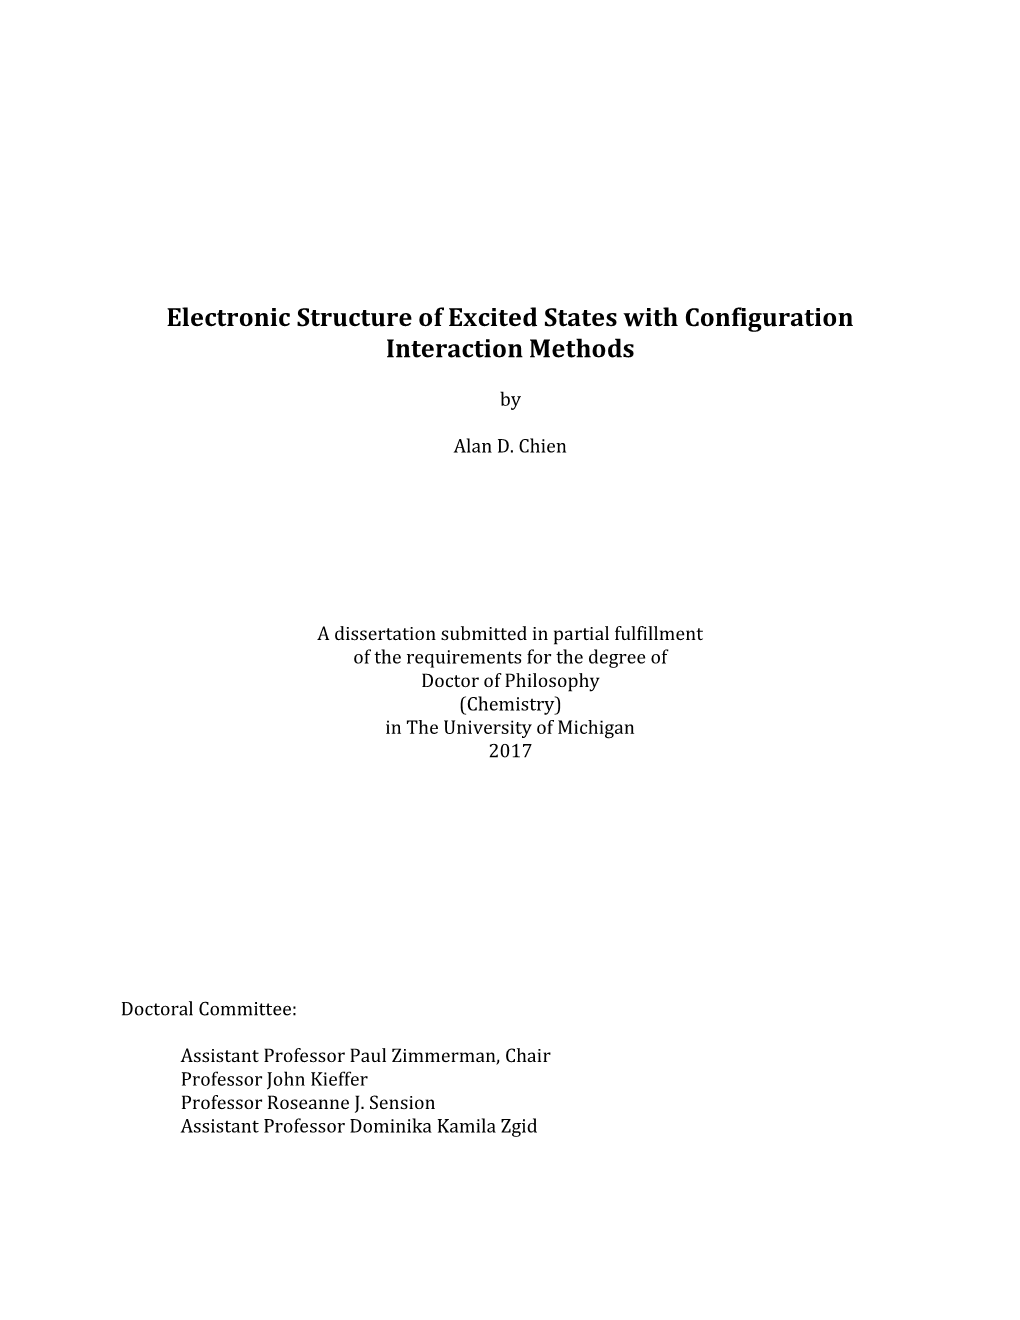 Electronic Structure of Excited States with Configuration Interaction Methods